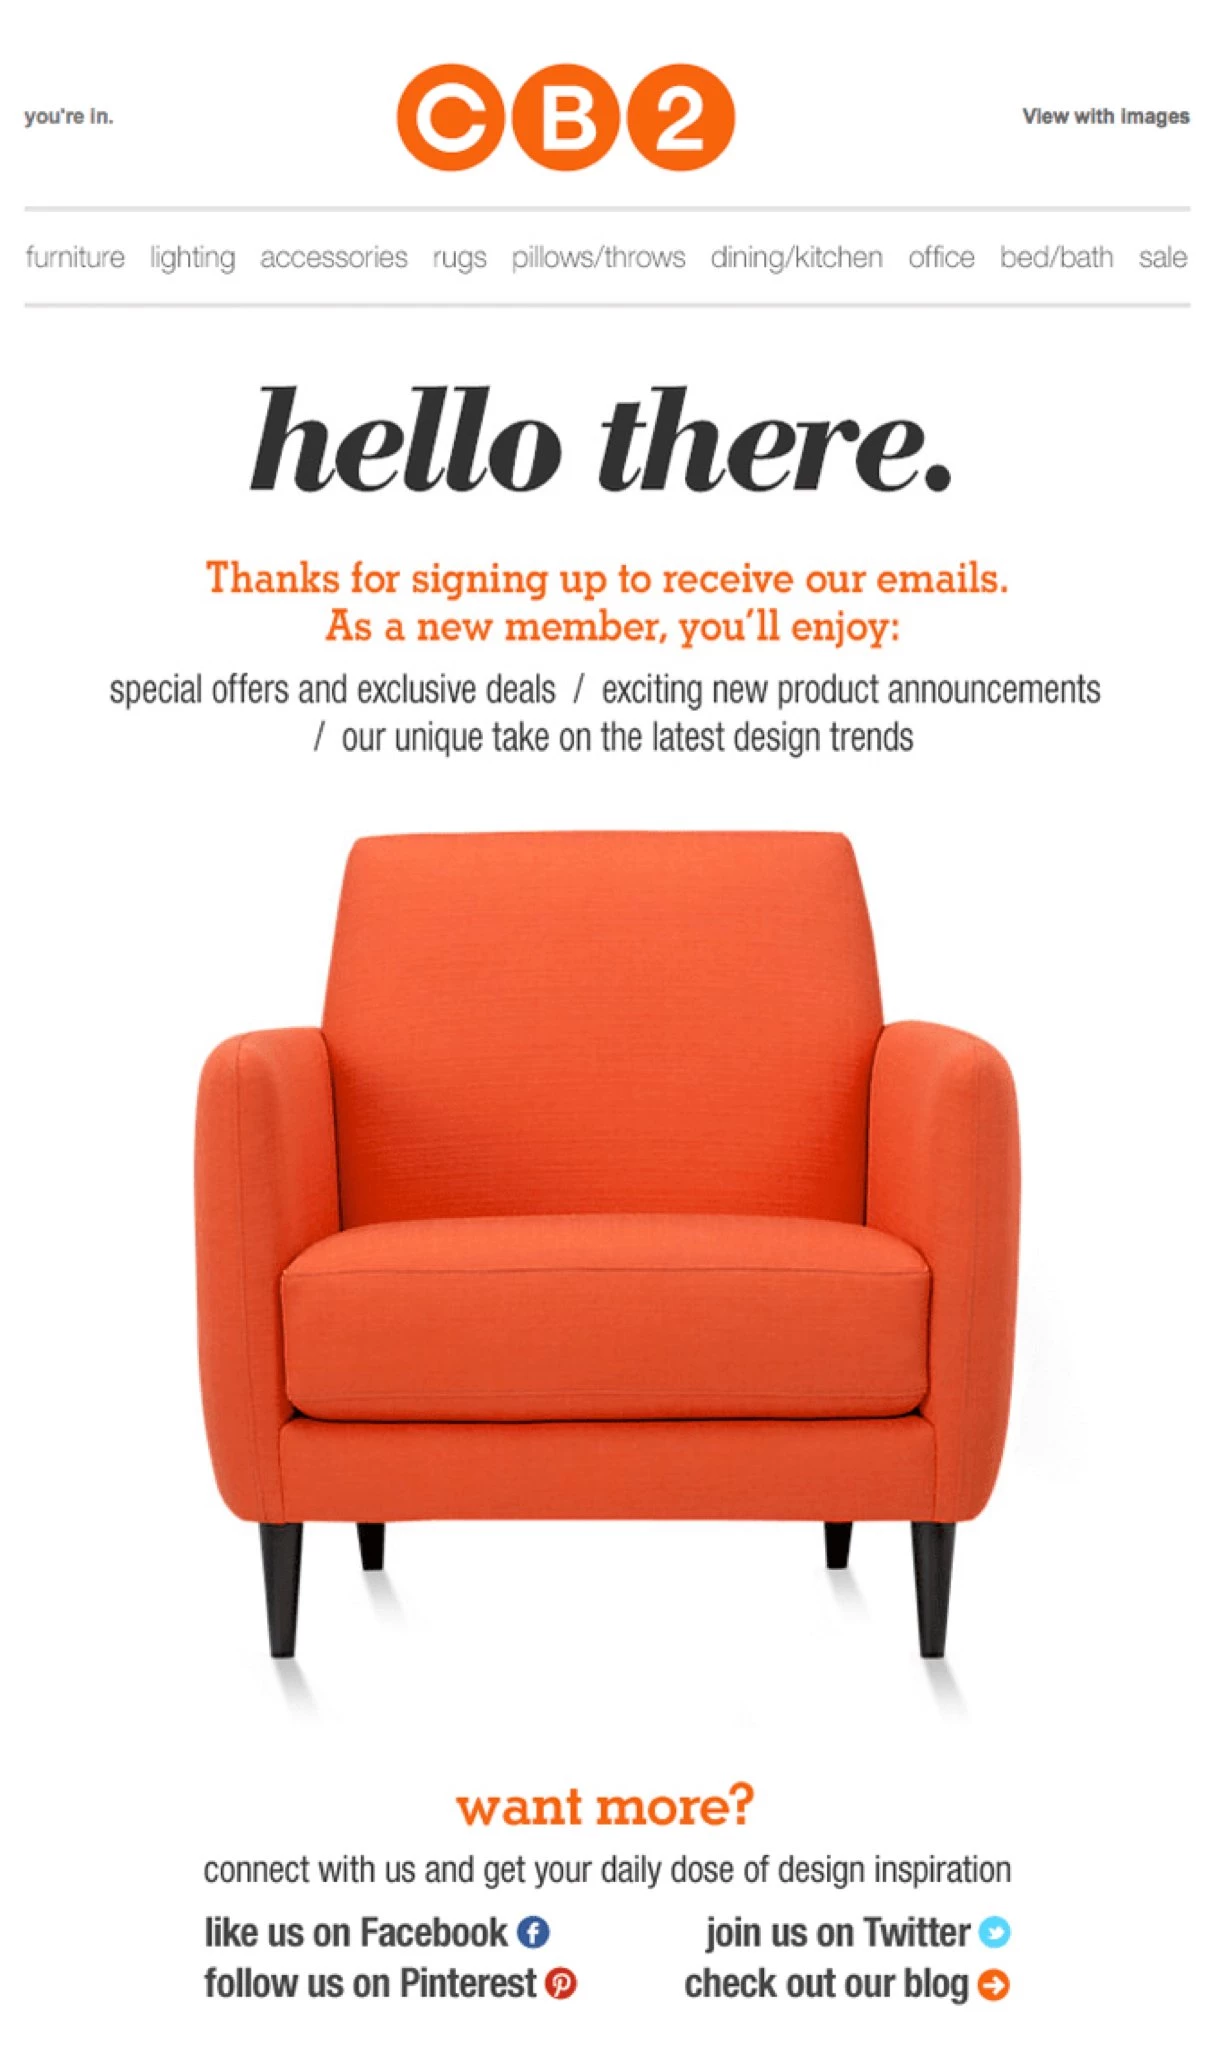 CB2 furniture welcome email example orange chair on white background